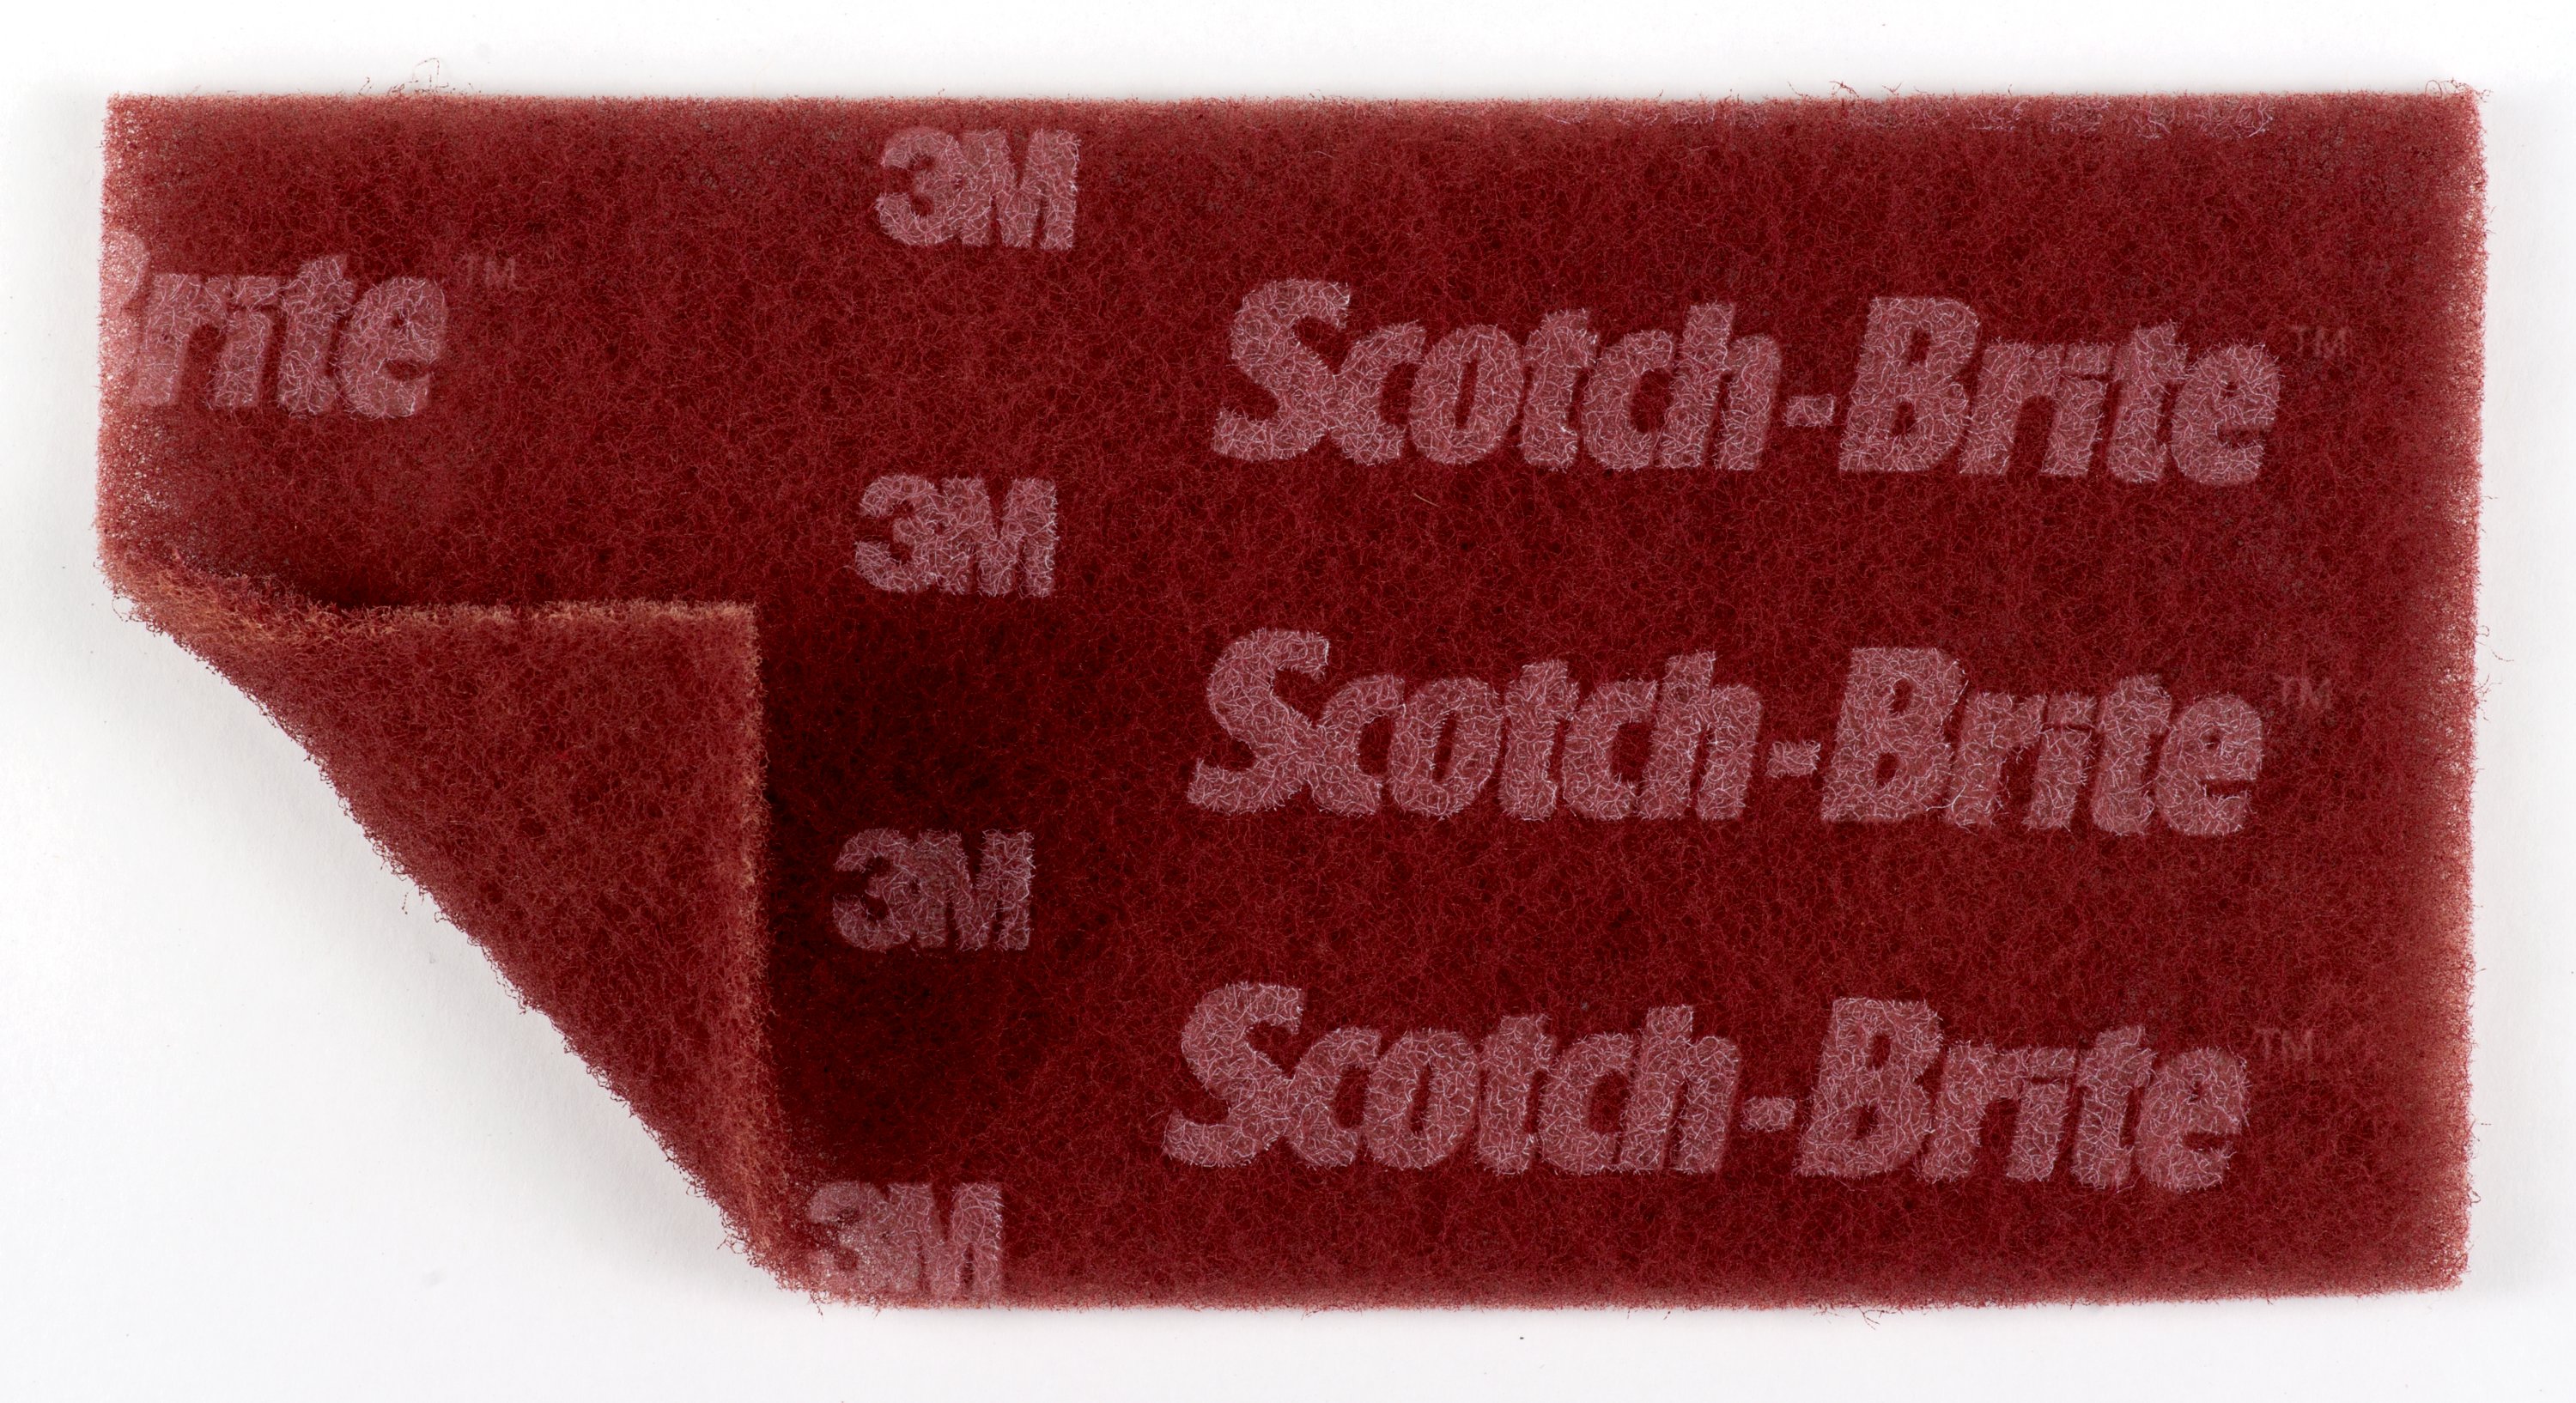 The performance of Scotch-Brite™ Durable Flex Hand Pad is comparable to steel wool, but our Scotch-Brite™ pads won't shred during use, rust after use, or create fine metal splinters.